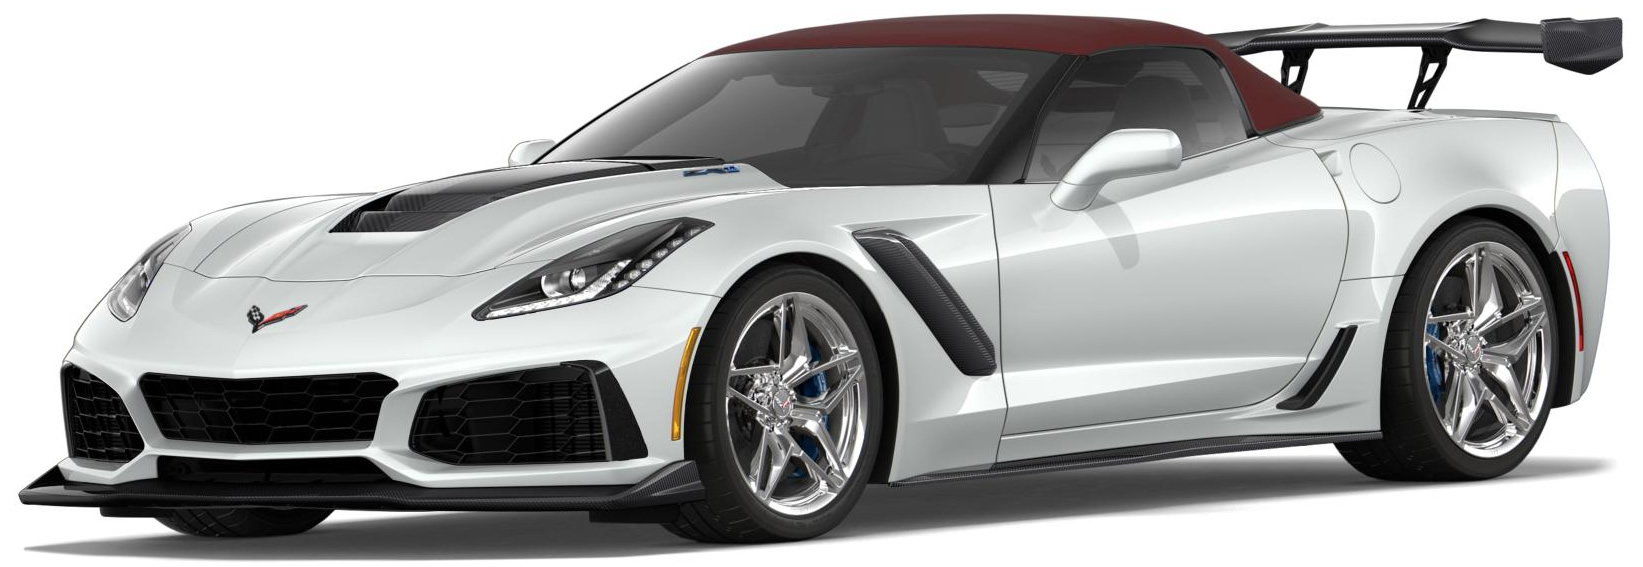 2019 Corvette ZR1 Convertible in Arctic White with the Spice Red Top, the ZTK Track Performance Package and chrome wheels